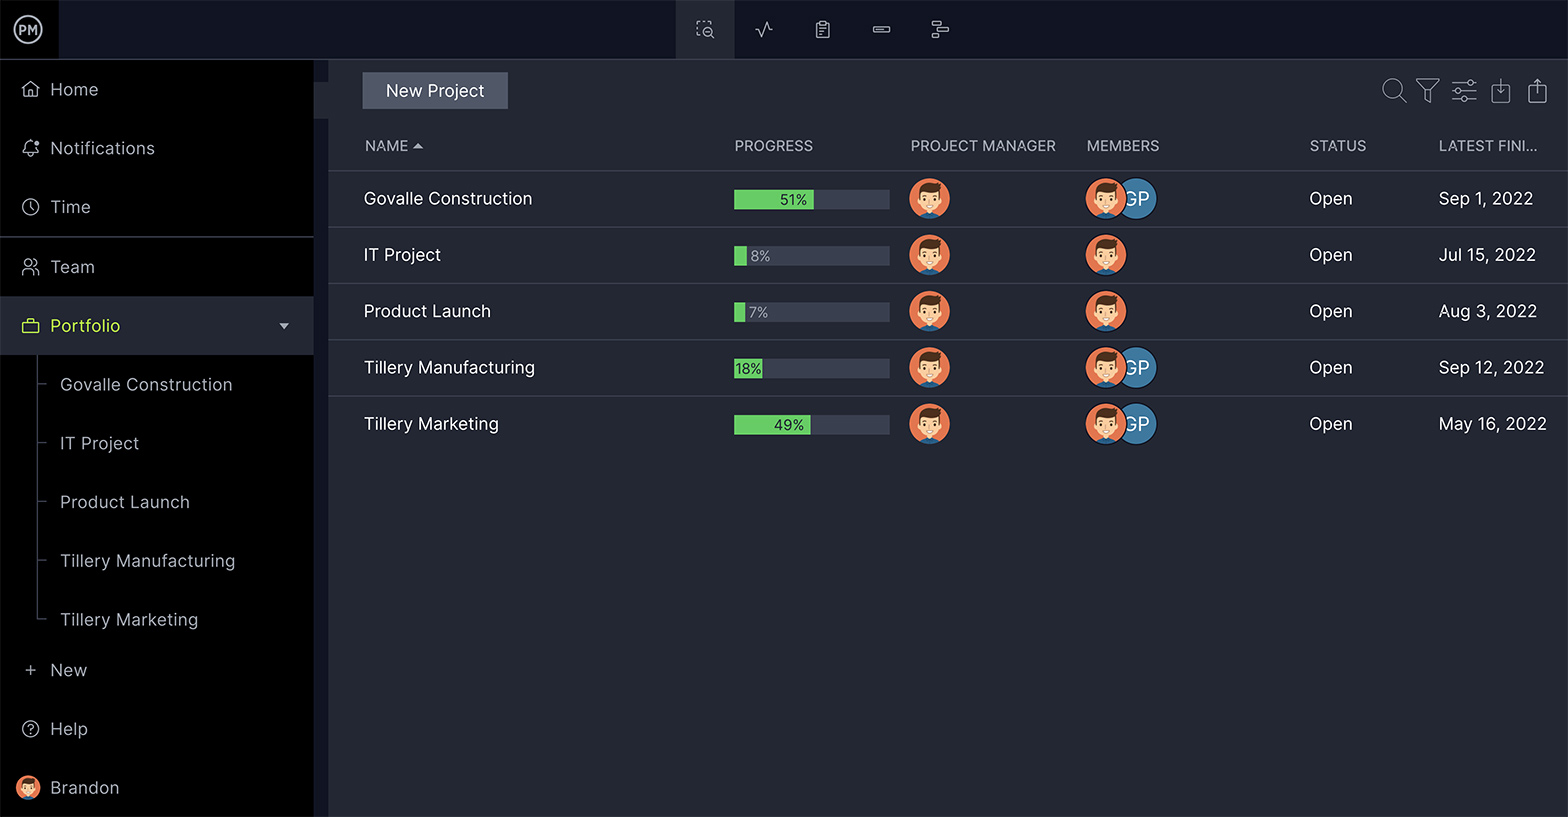 ProjectManager's collaboration tools showing members of a kanban project management team